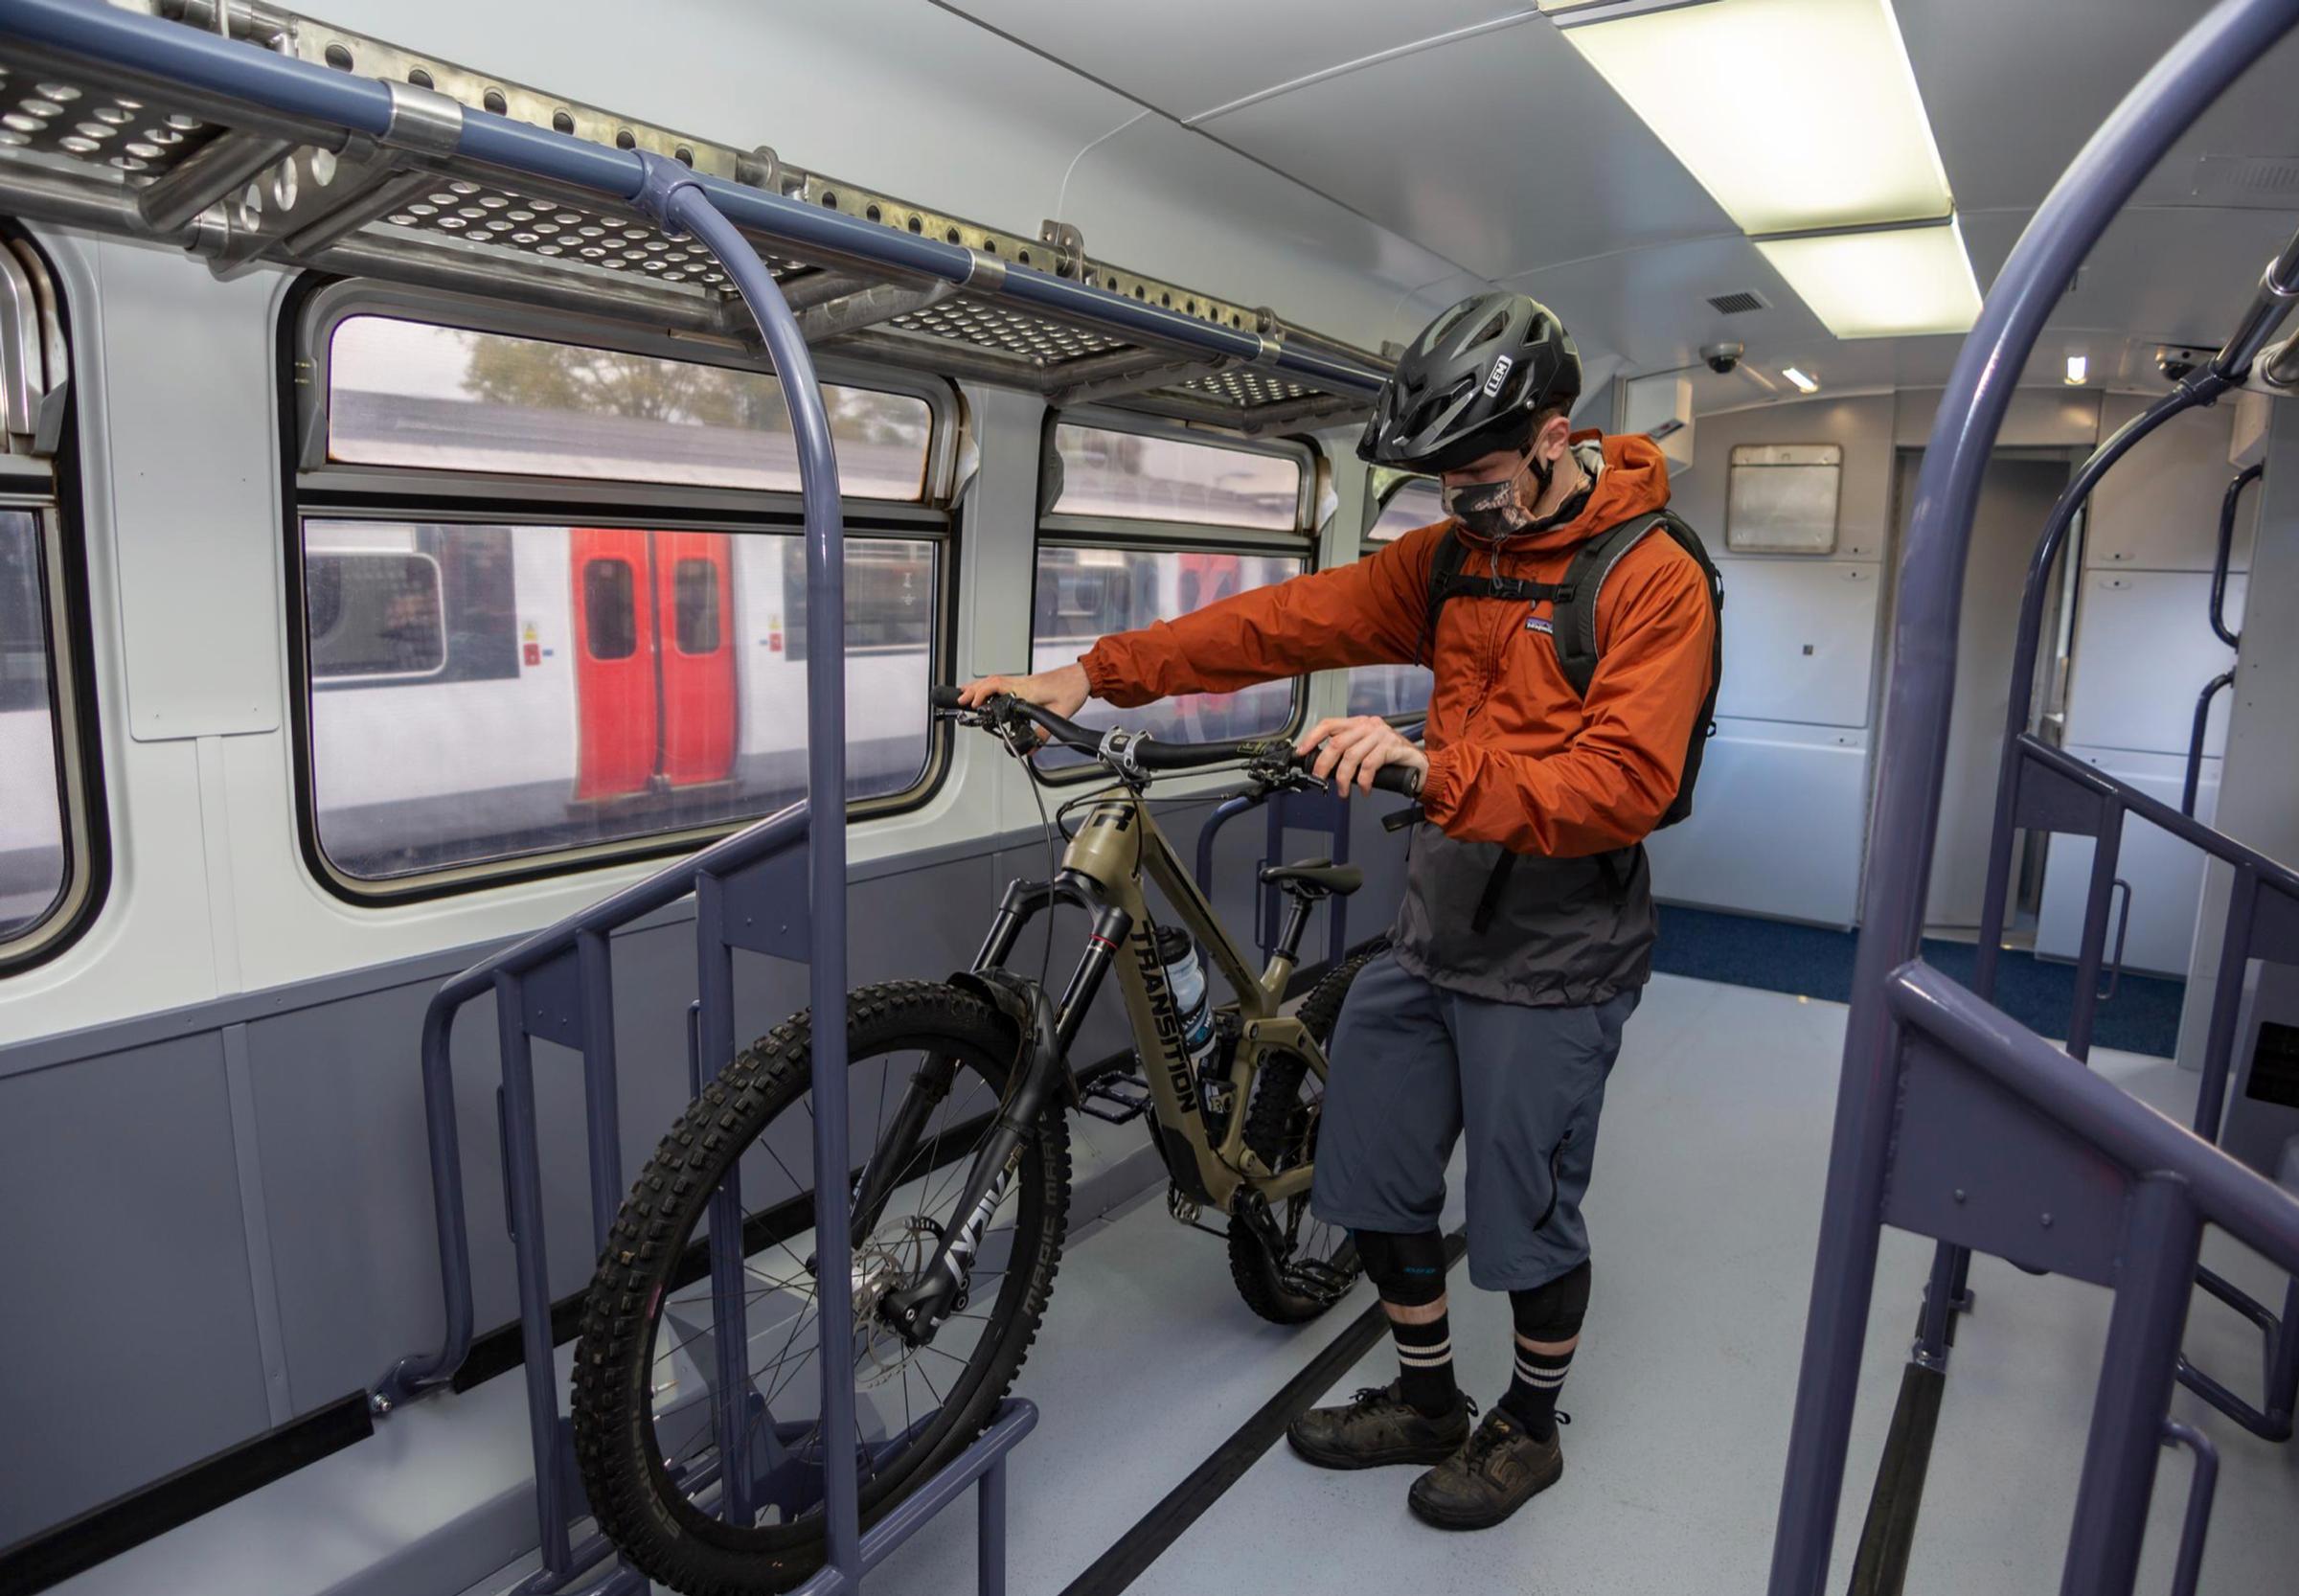 ScotRail carried 2,000 cyclists despite changing Covid restrictions